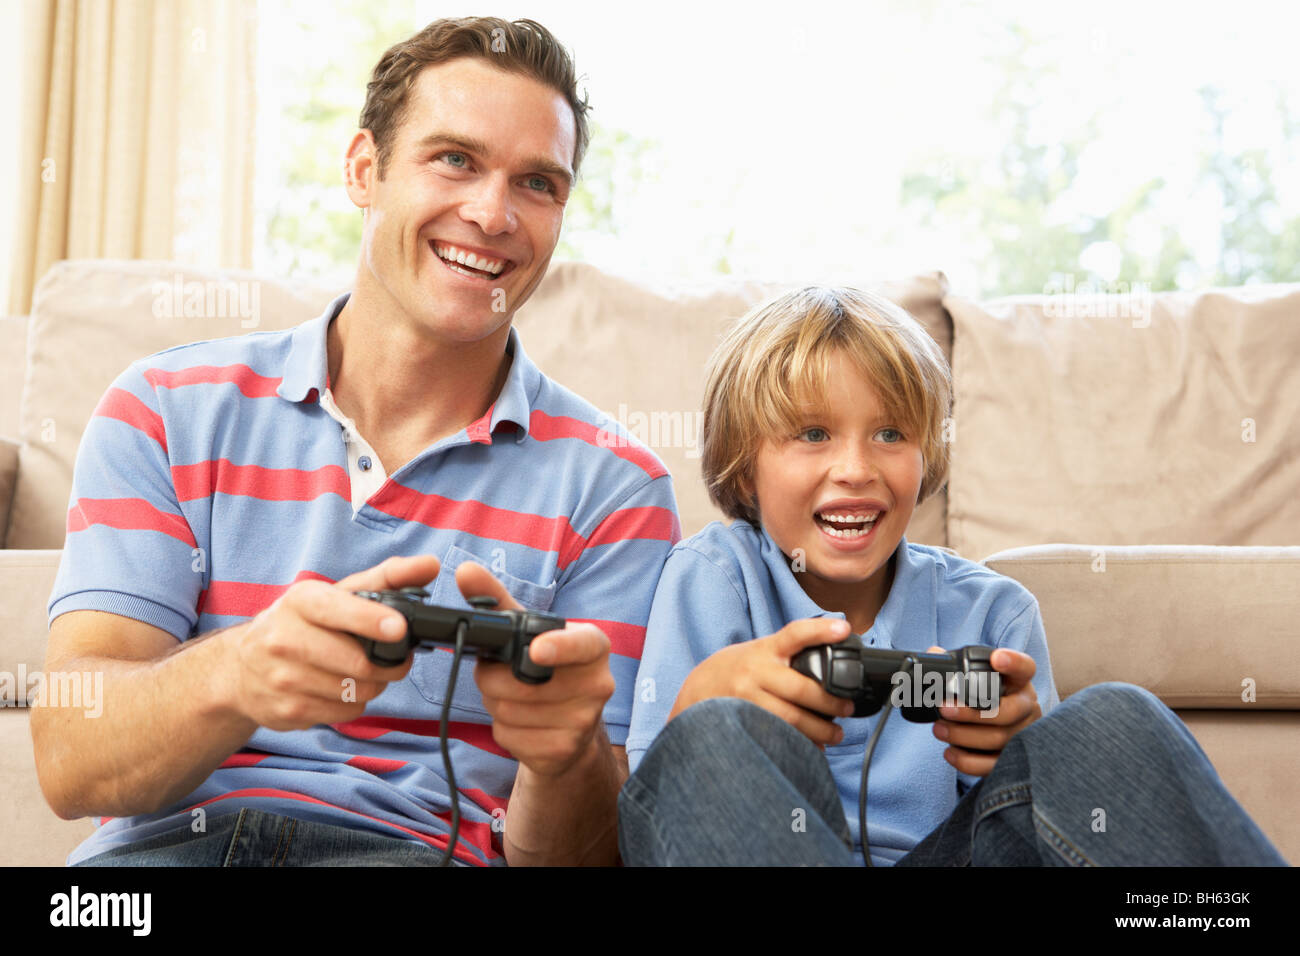 Father And Son Playing Computer Game On Sofa At Home Stock Photo